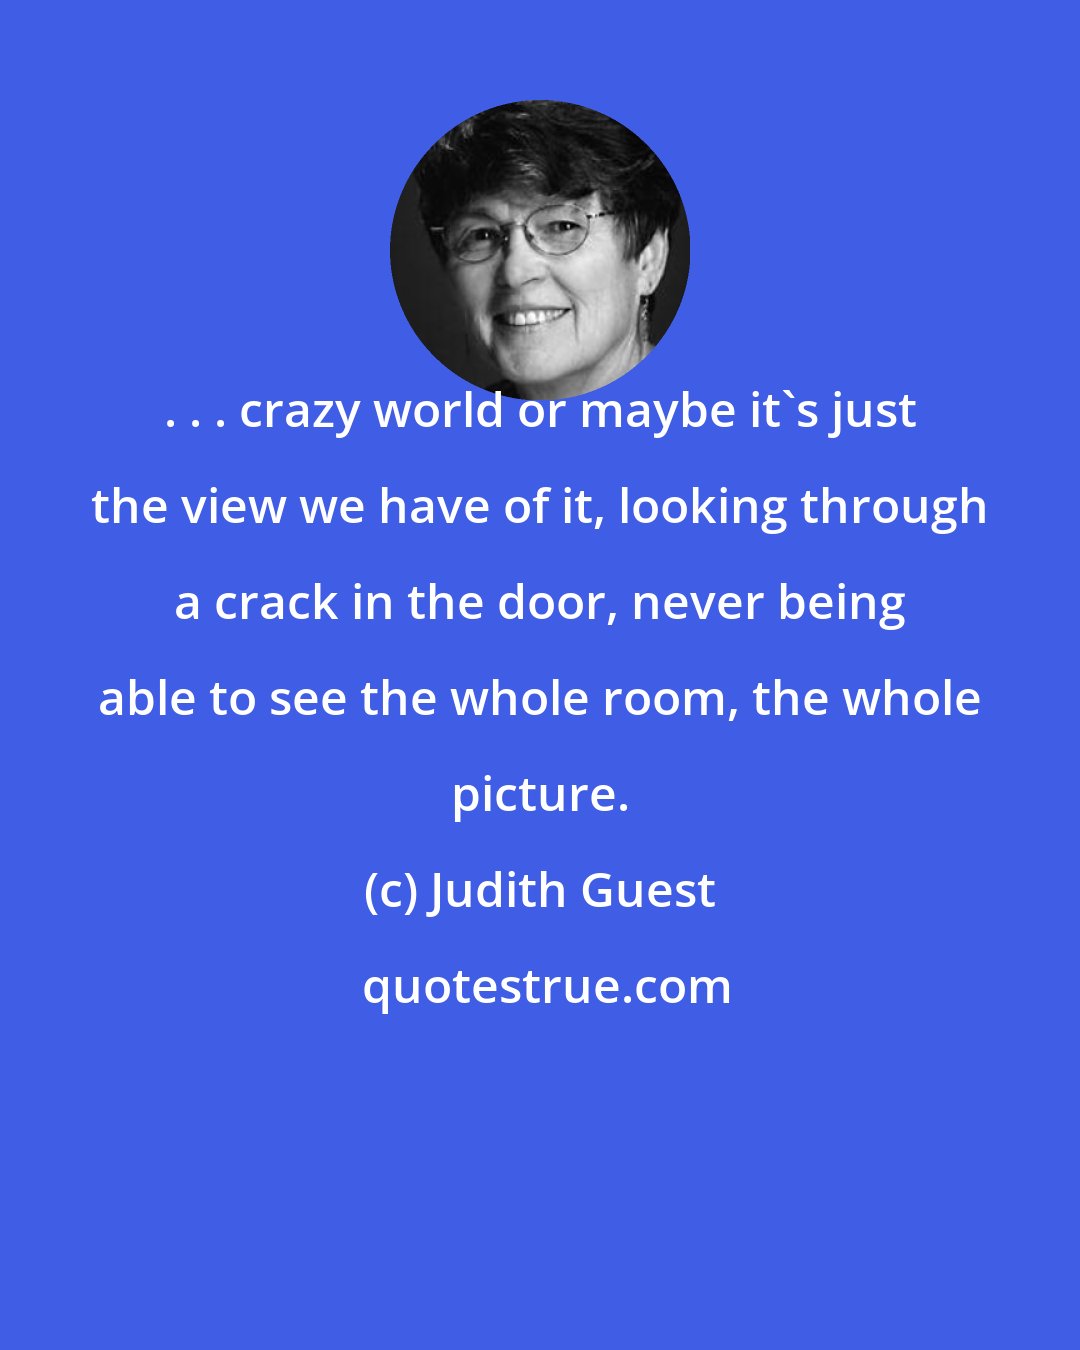 Judith Guest: . . . crazy world or maybe it's just the view we have of it, looking through a crack in the door, never being able to see the whole room, the whole picture.